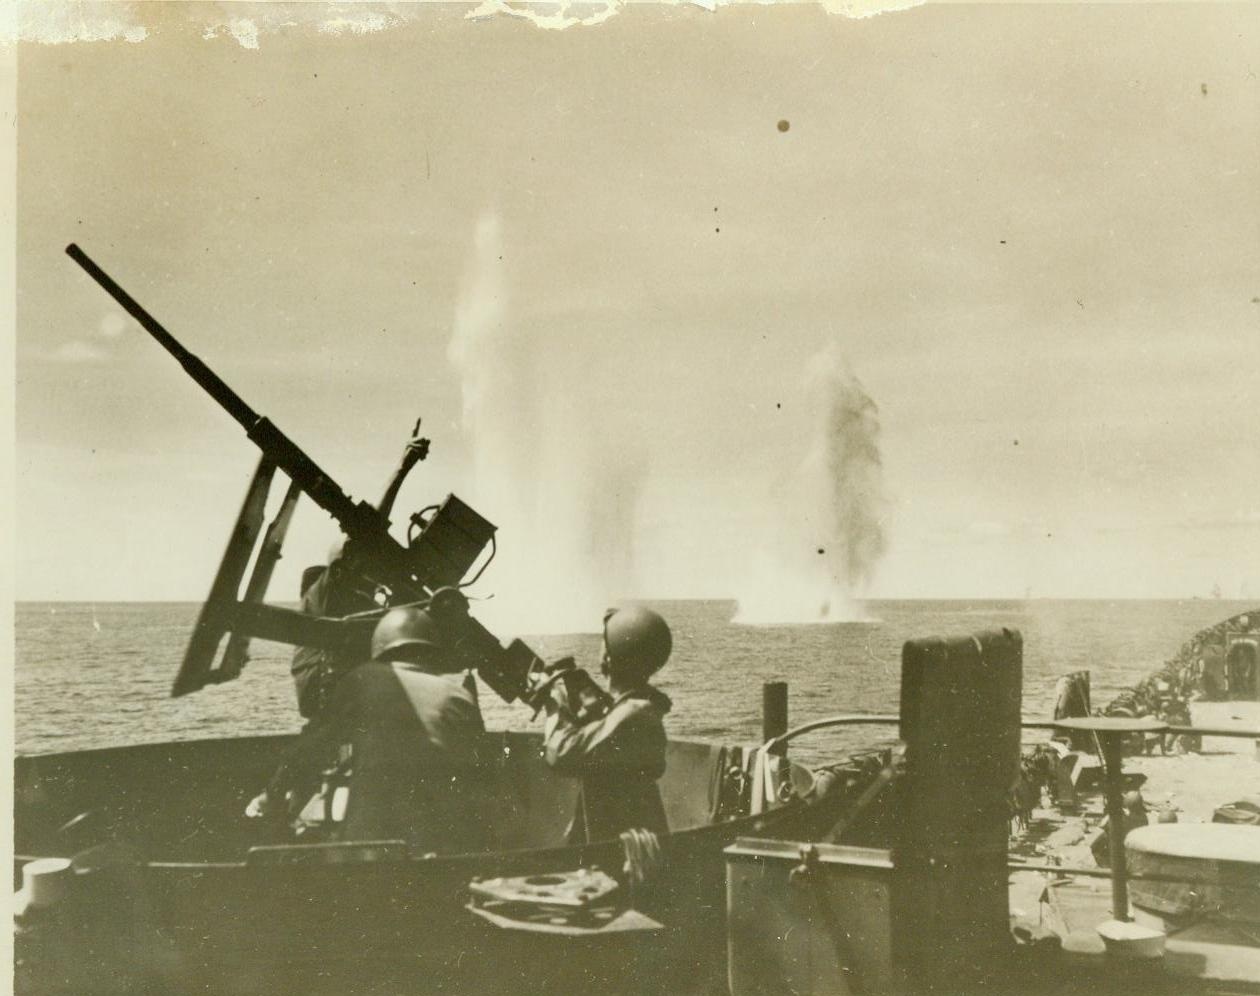 ...Guard Gets Some Near Misses, 1/10/1944. ...BRITAIN - Far too close for comfort...the white geysers that mark Jap bombs...near an American LST (Landing Ship...) which aids the invasion of Cape...New Britain. Behind the...anti-aircraft gun, a U.S. Coast Guardsman...at the sky and an enemy plane.;